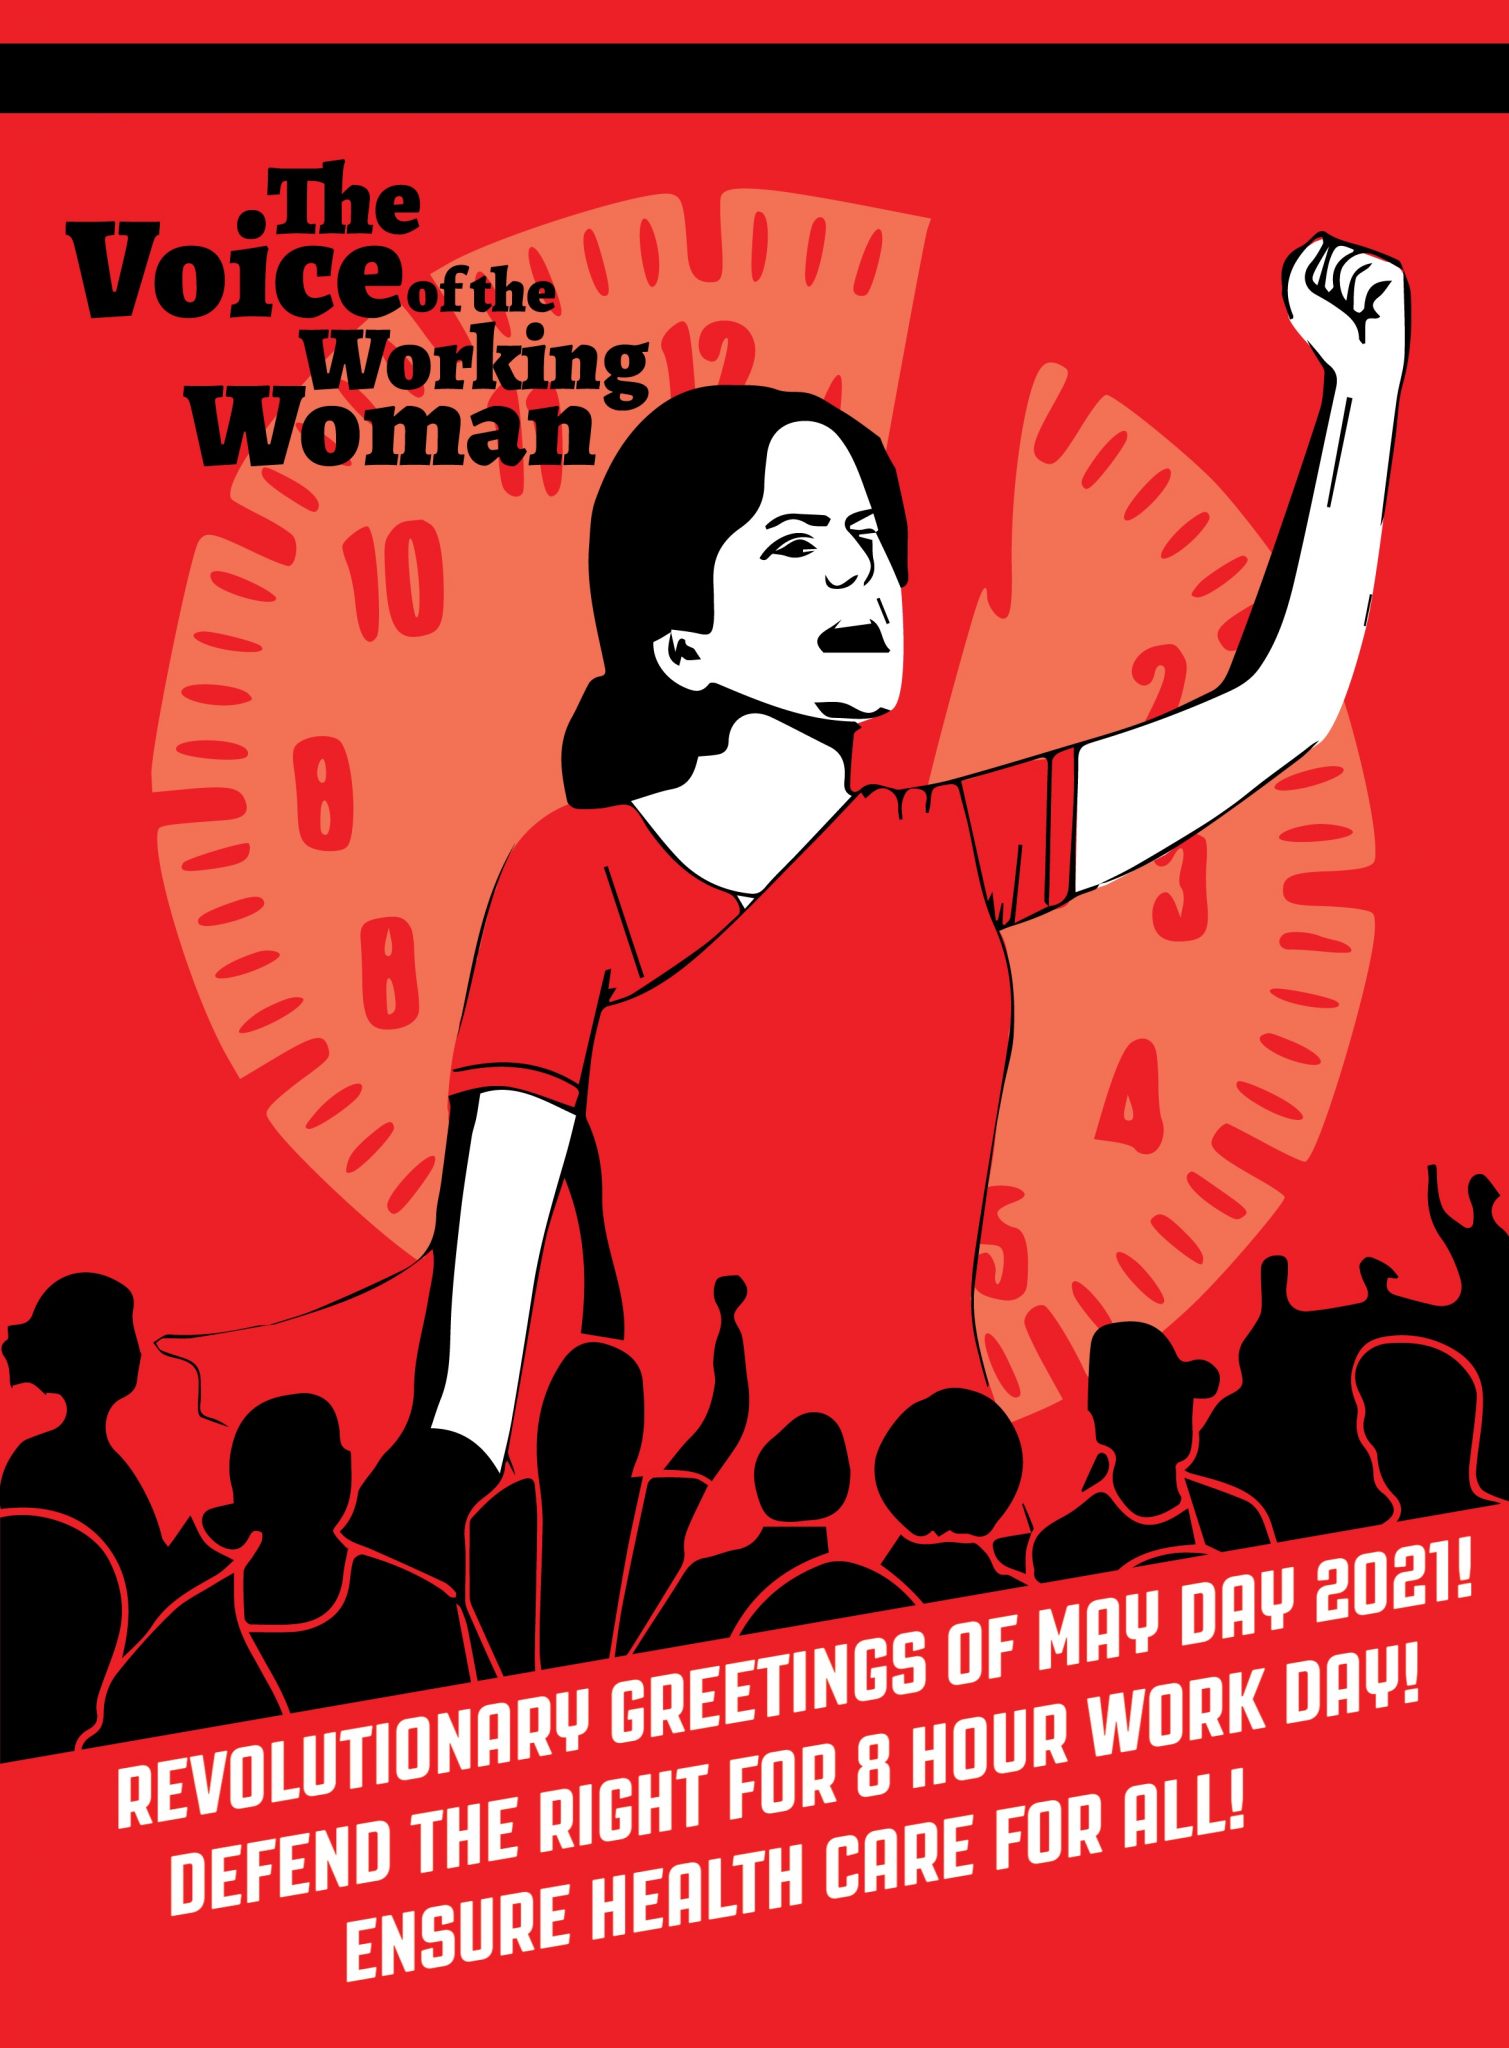 On May Day The Voice of the Working Woman Indian Cultural Forum